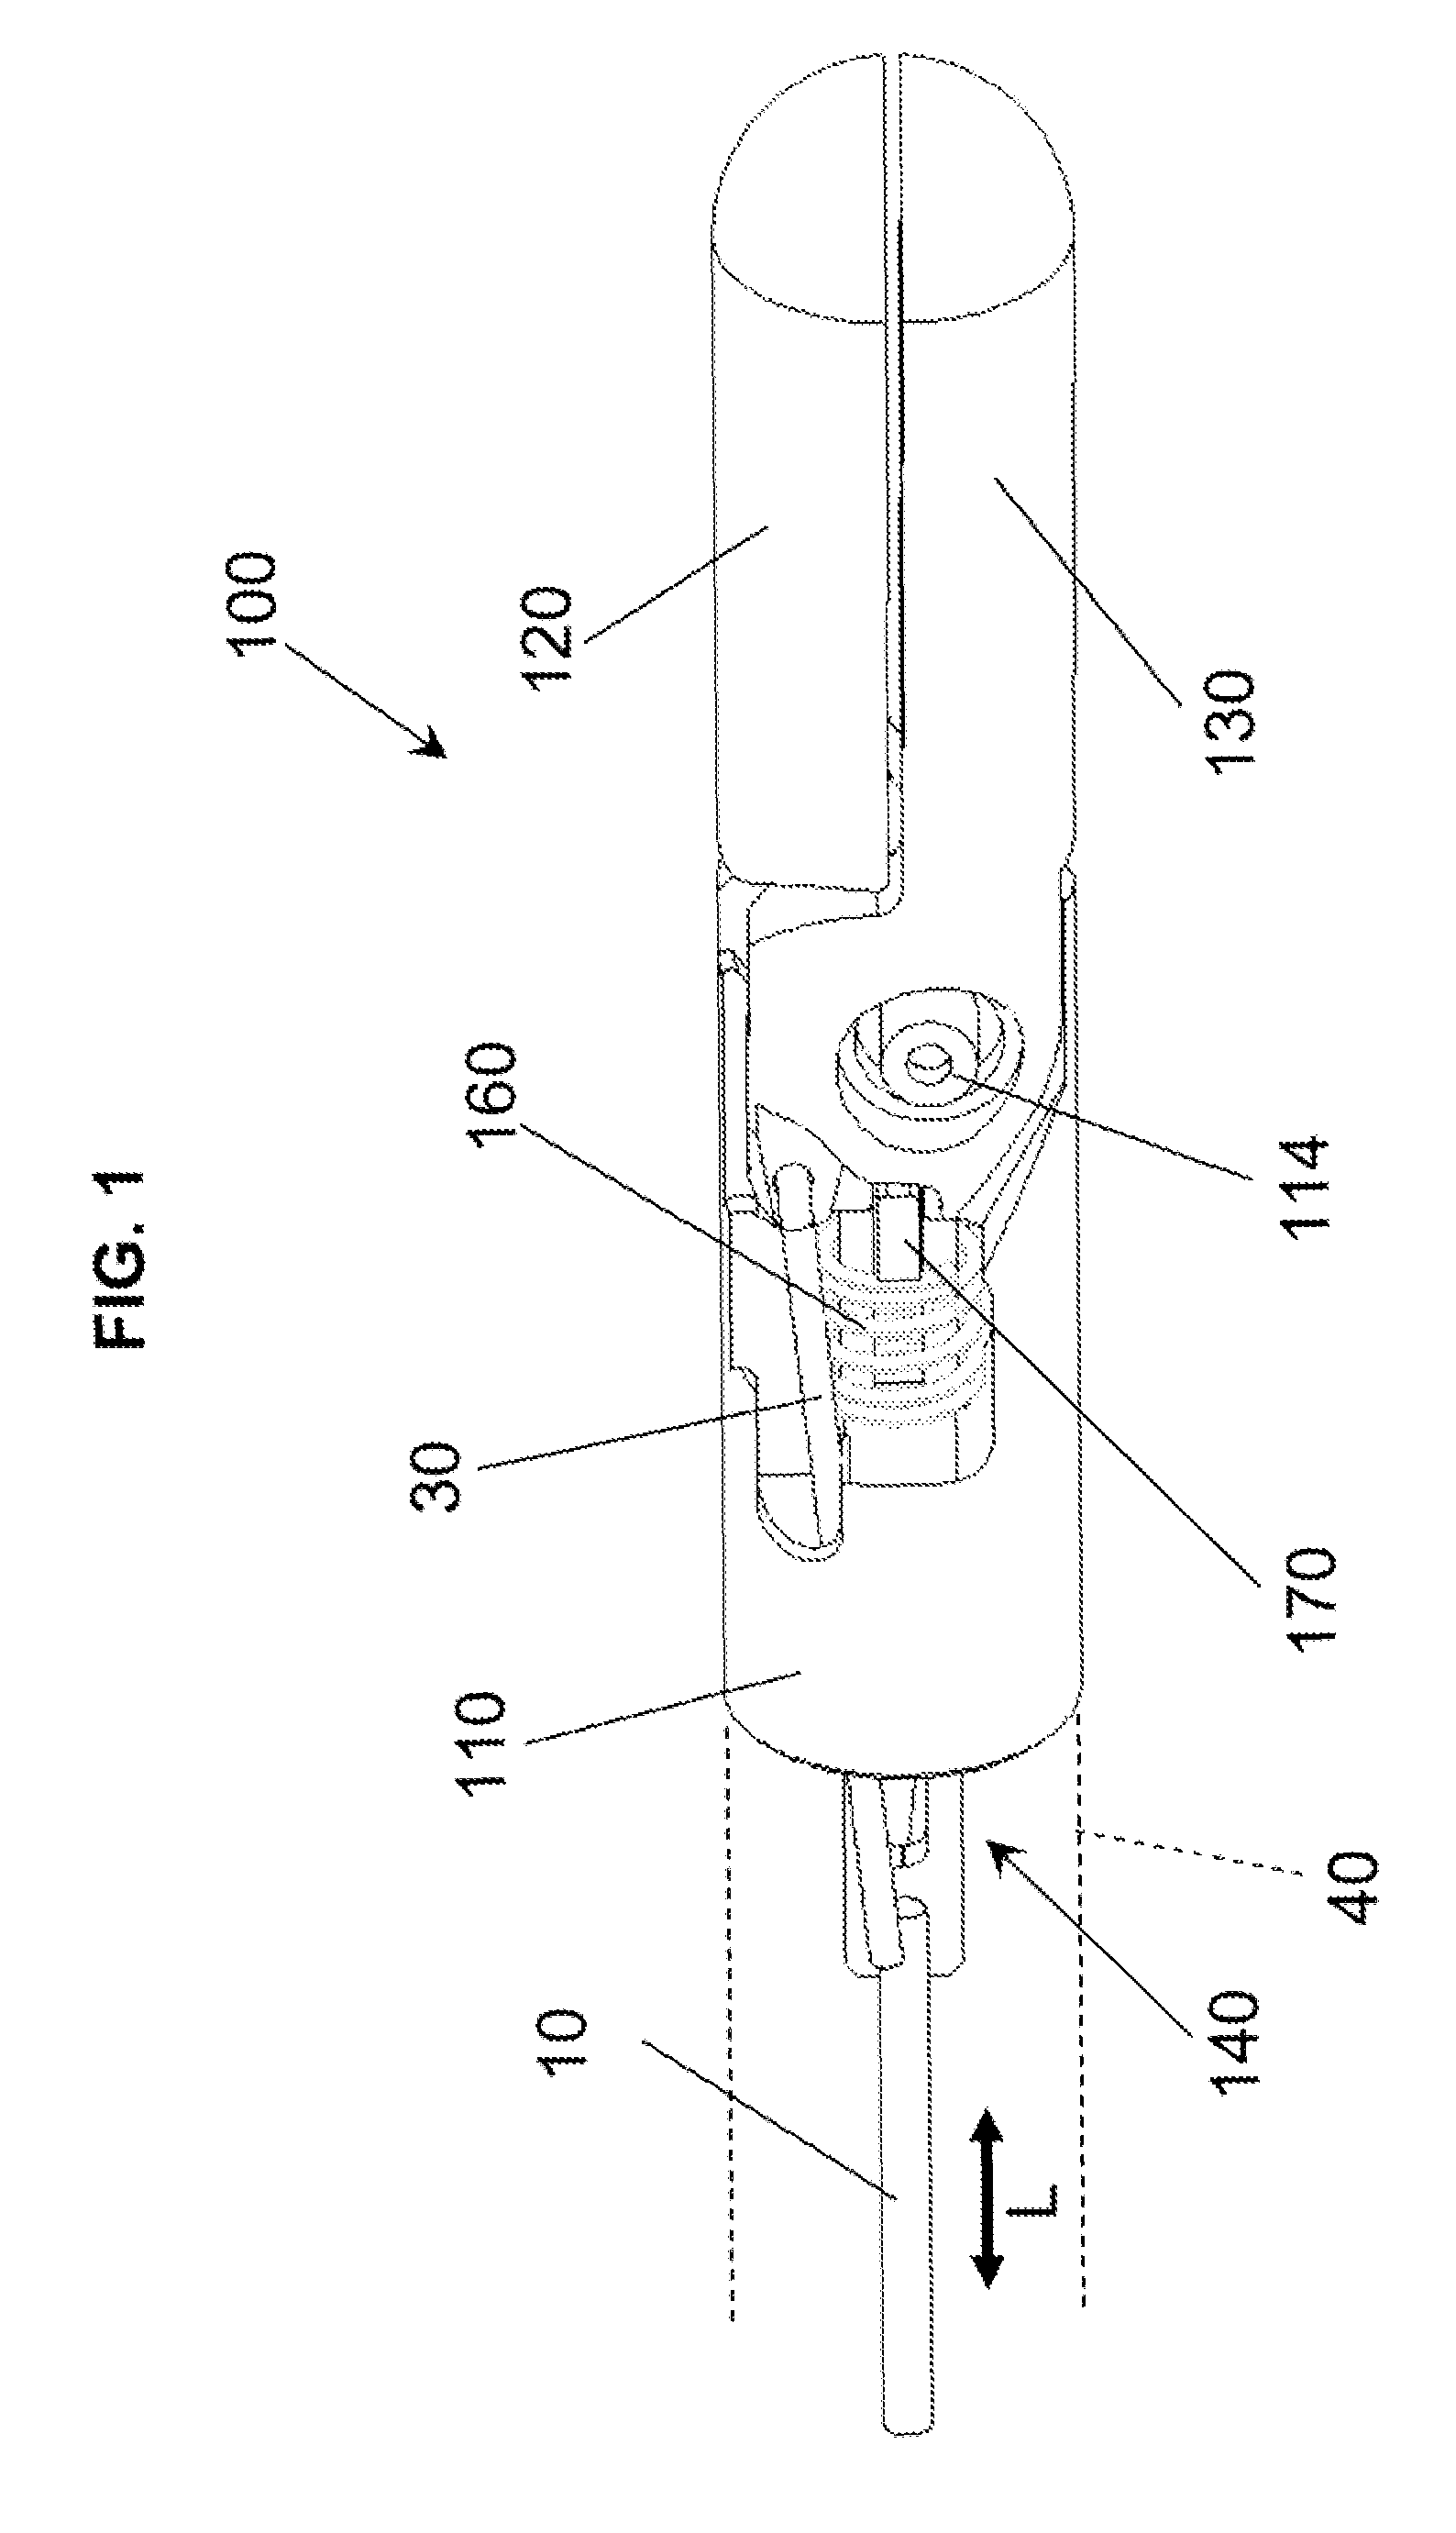 Method for powering a surgical instrument